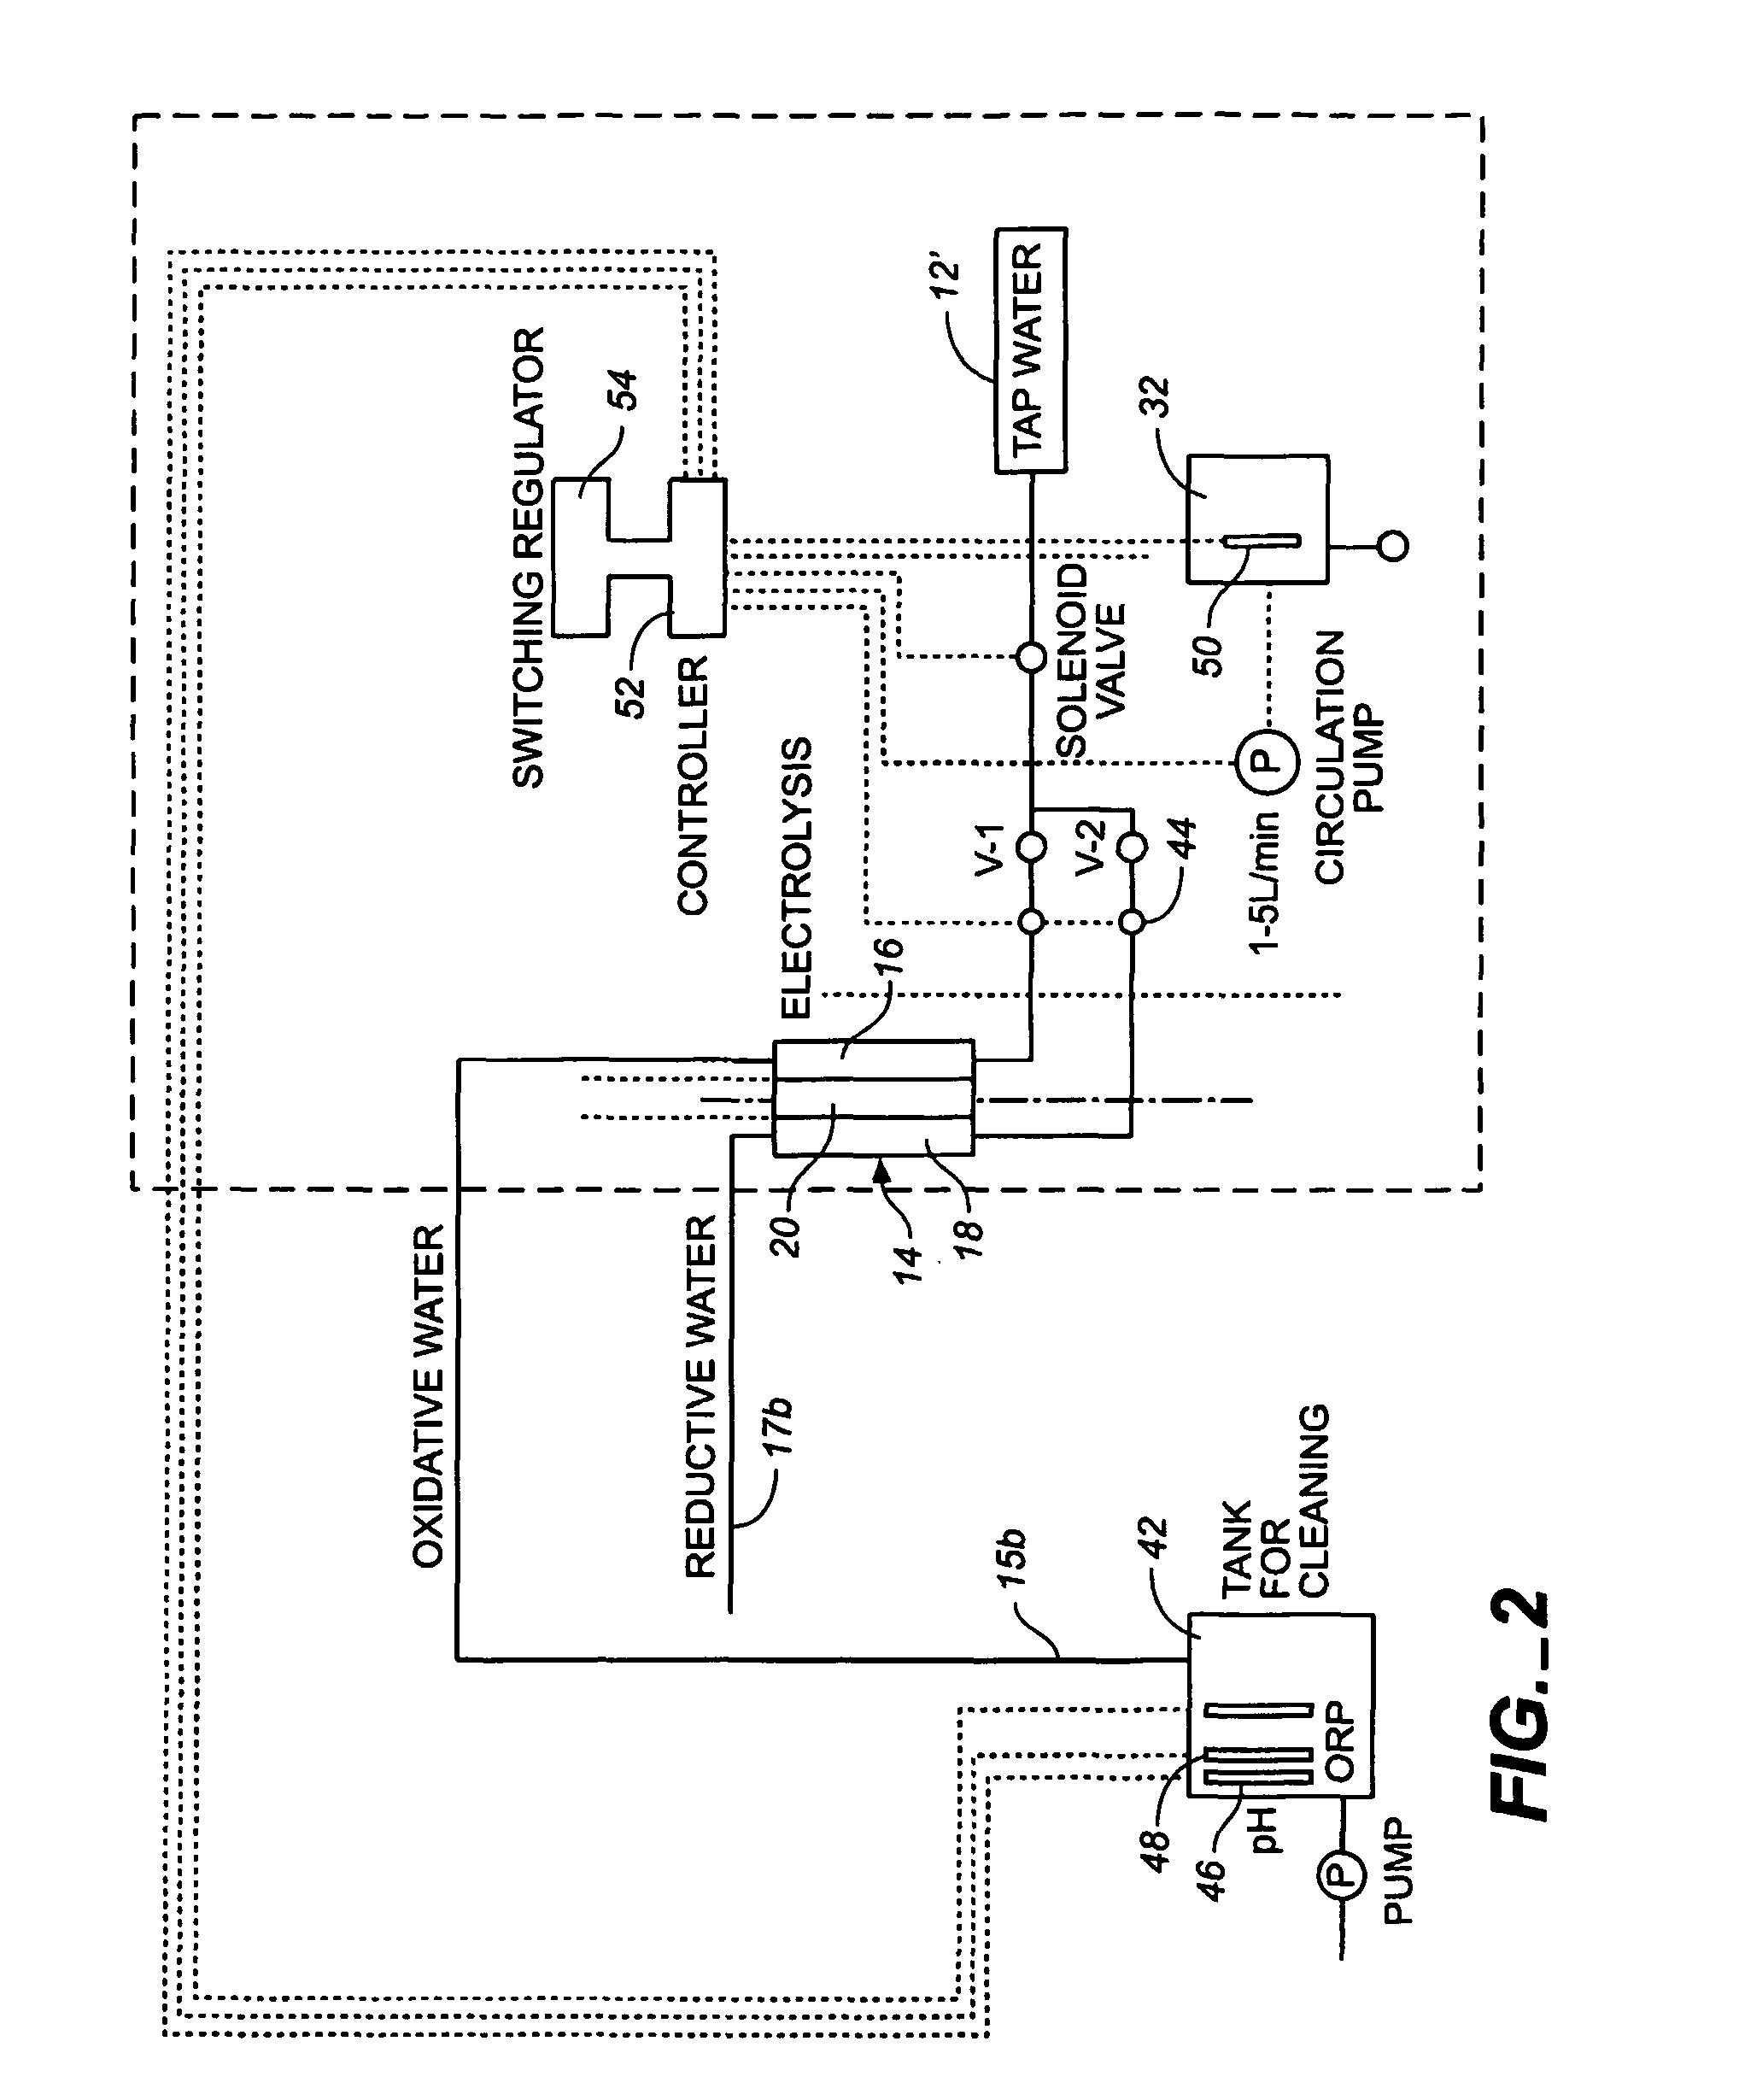 Method and apparatus for producing negative and positive oxidative reductive potential (ORP) water